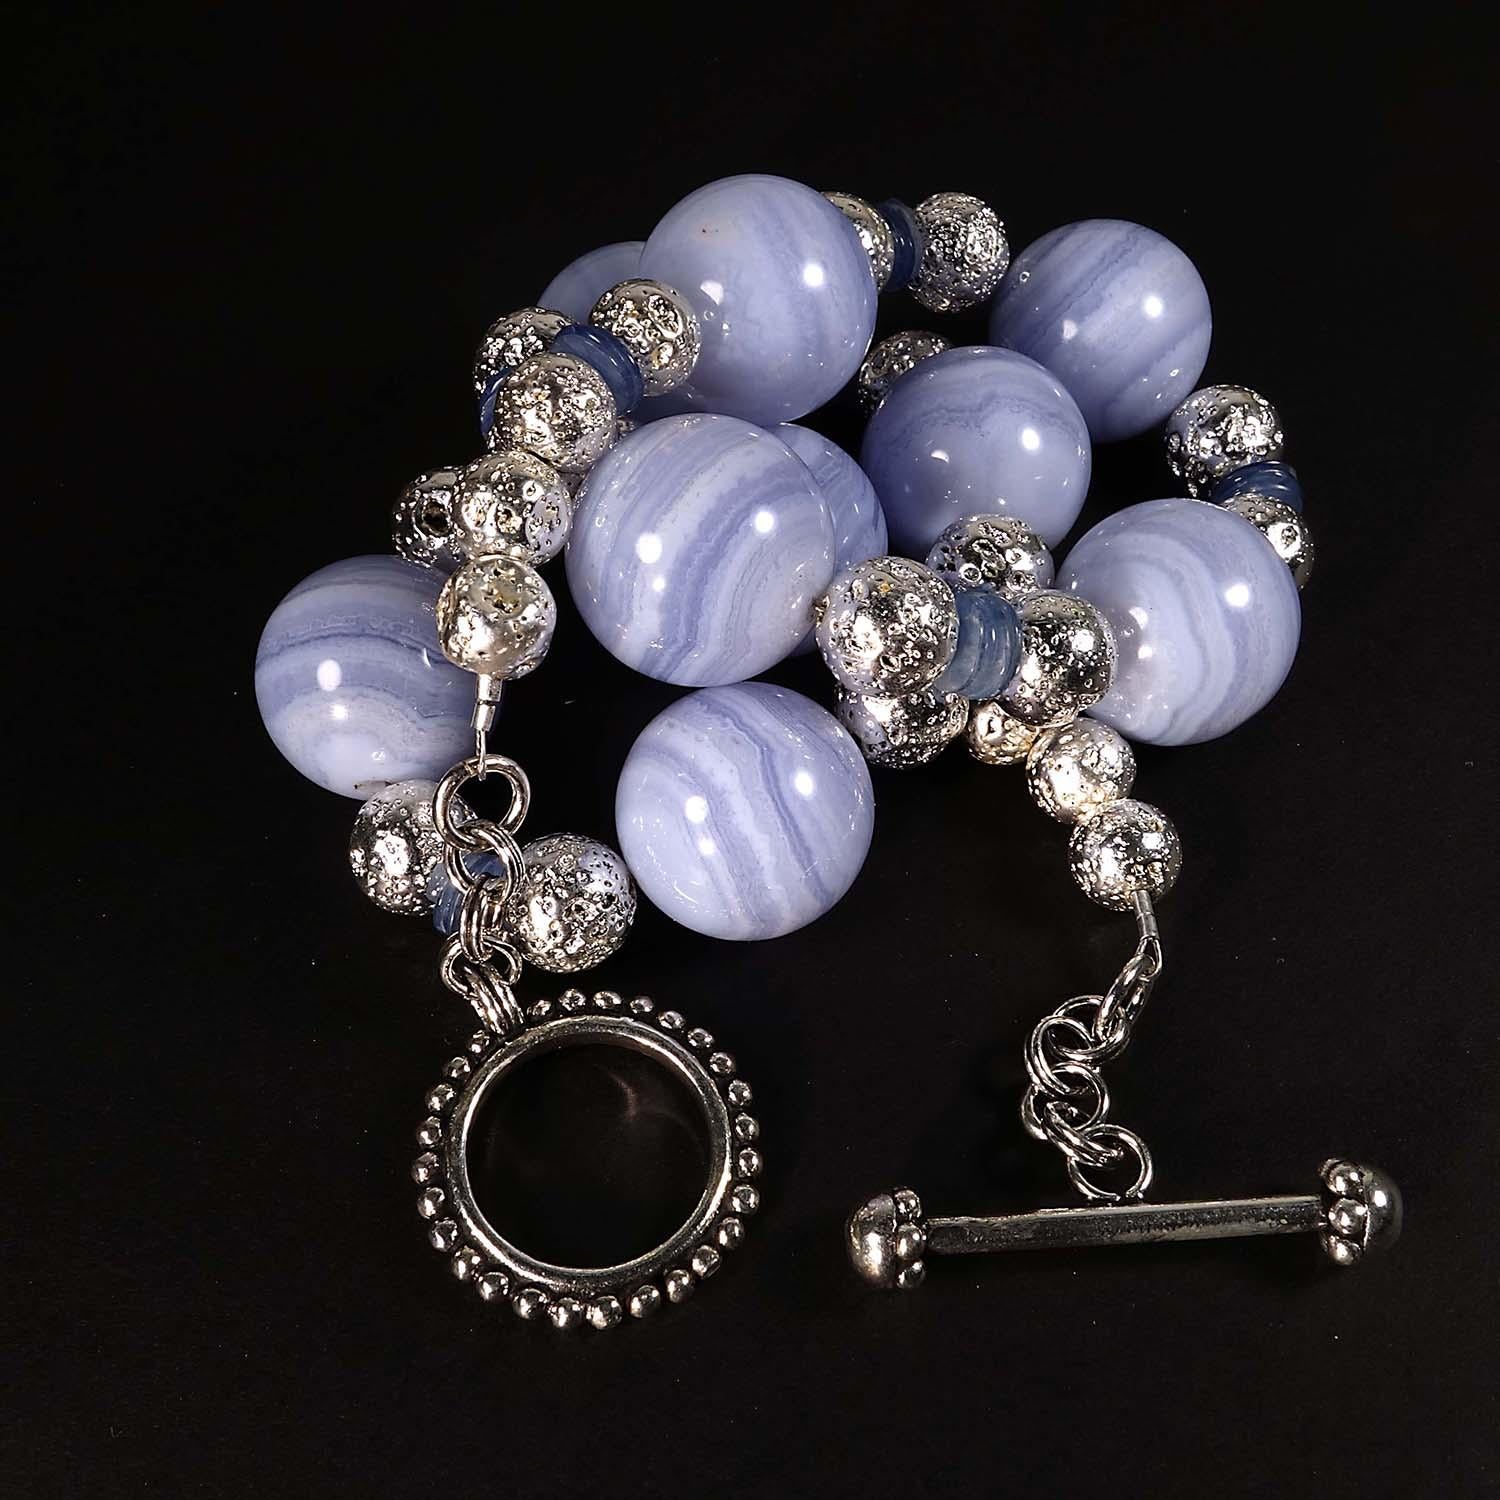 Stunning Blue Lace Agate Necklace 7